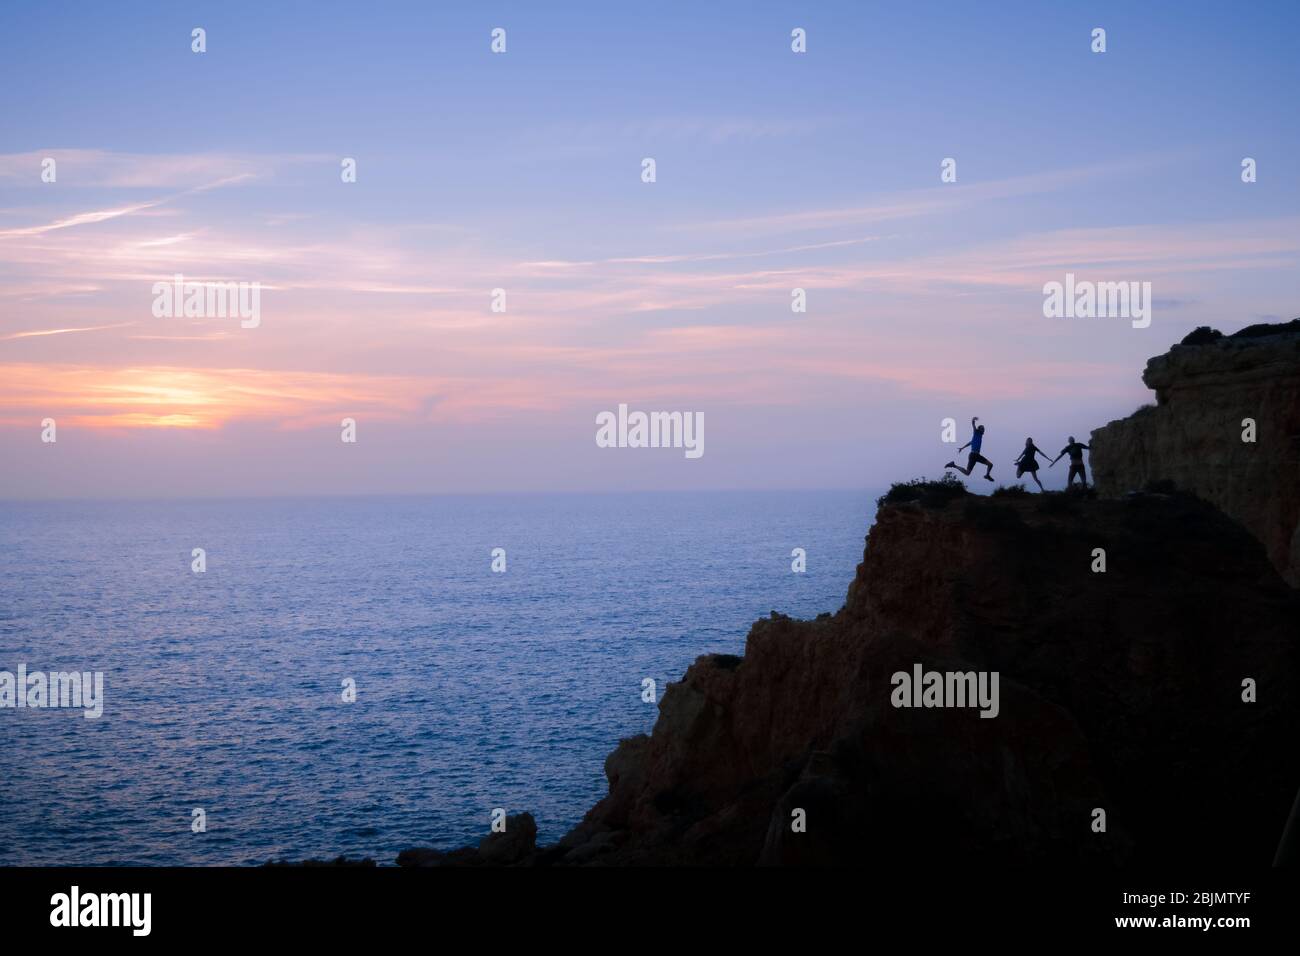 A group of 3 friends on vacation jumps at the same time for a picture taken on timer, making up a fun backlight image on top of the cliffs. Stock Photo